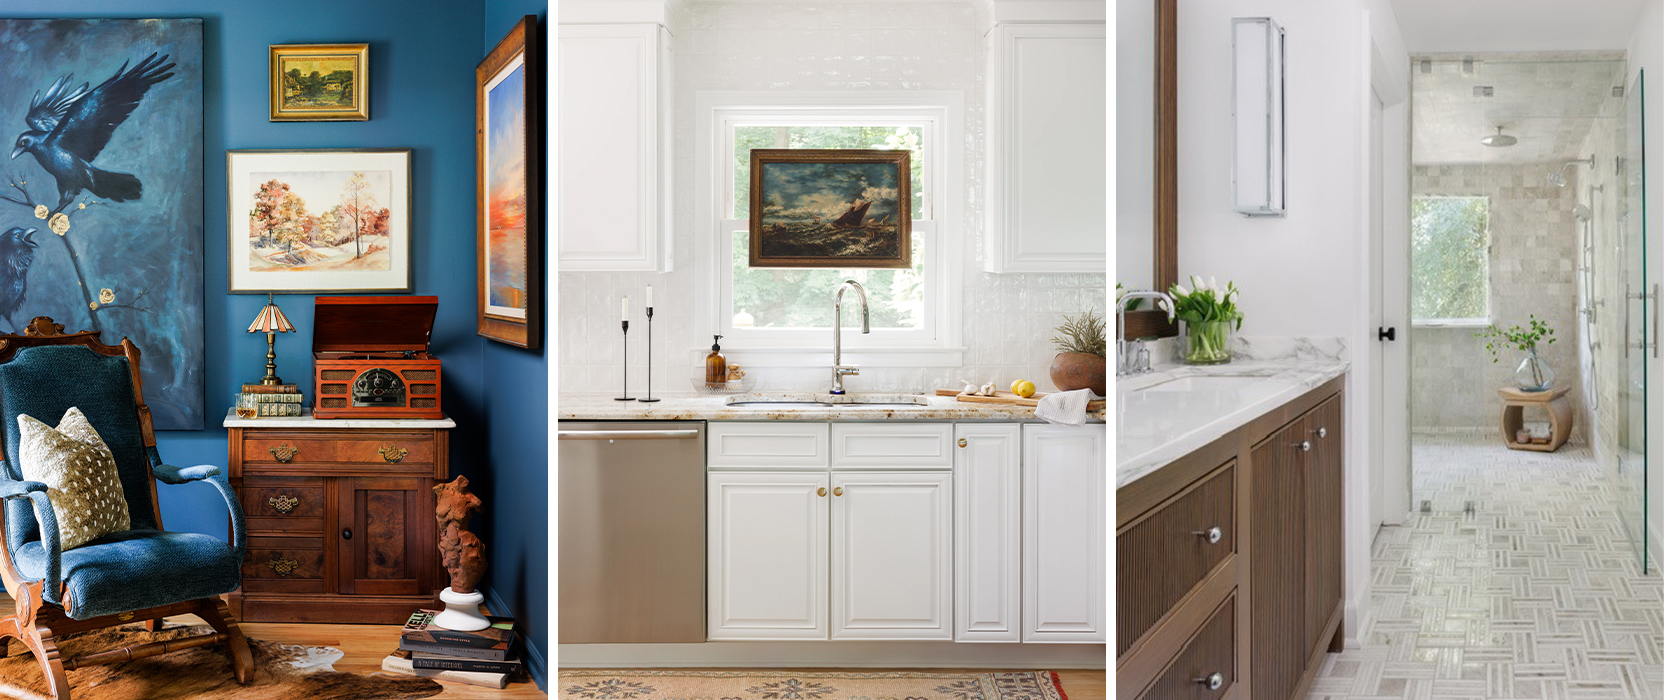 Left image: Corner of eclectic design room with bold blue walls, antique upholstered chair, tabletop record player and unique art and accessories. Center image: Kitchen sink with white cabinetry, light countertops, and framed art handing in window. Right image: Spa-like bathroom with white walls, wooden vanity, and walk-in shower tiled in soft colors.